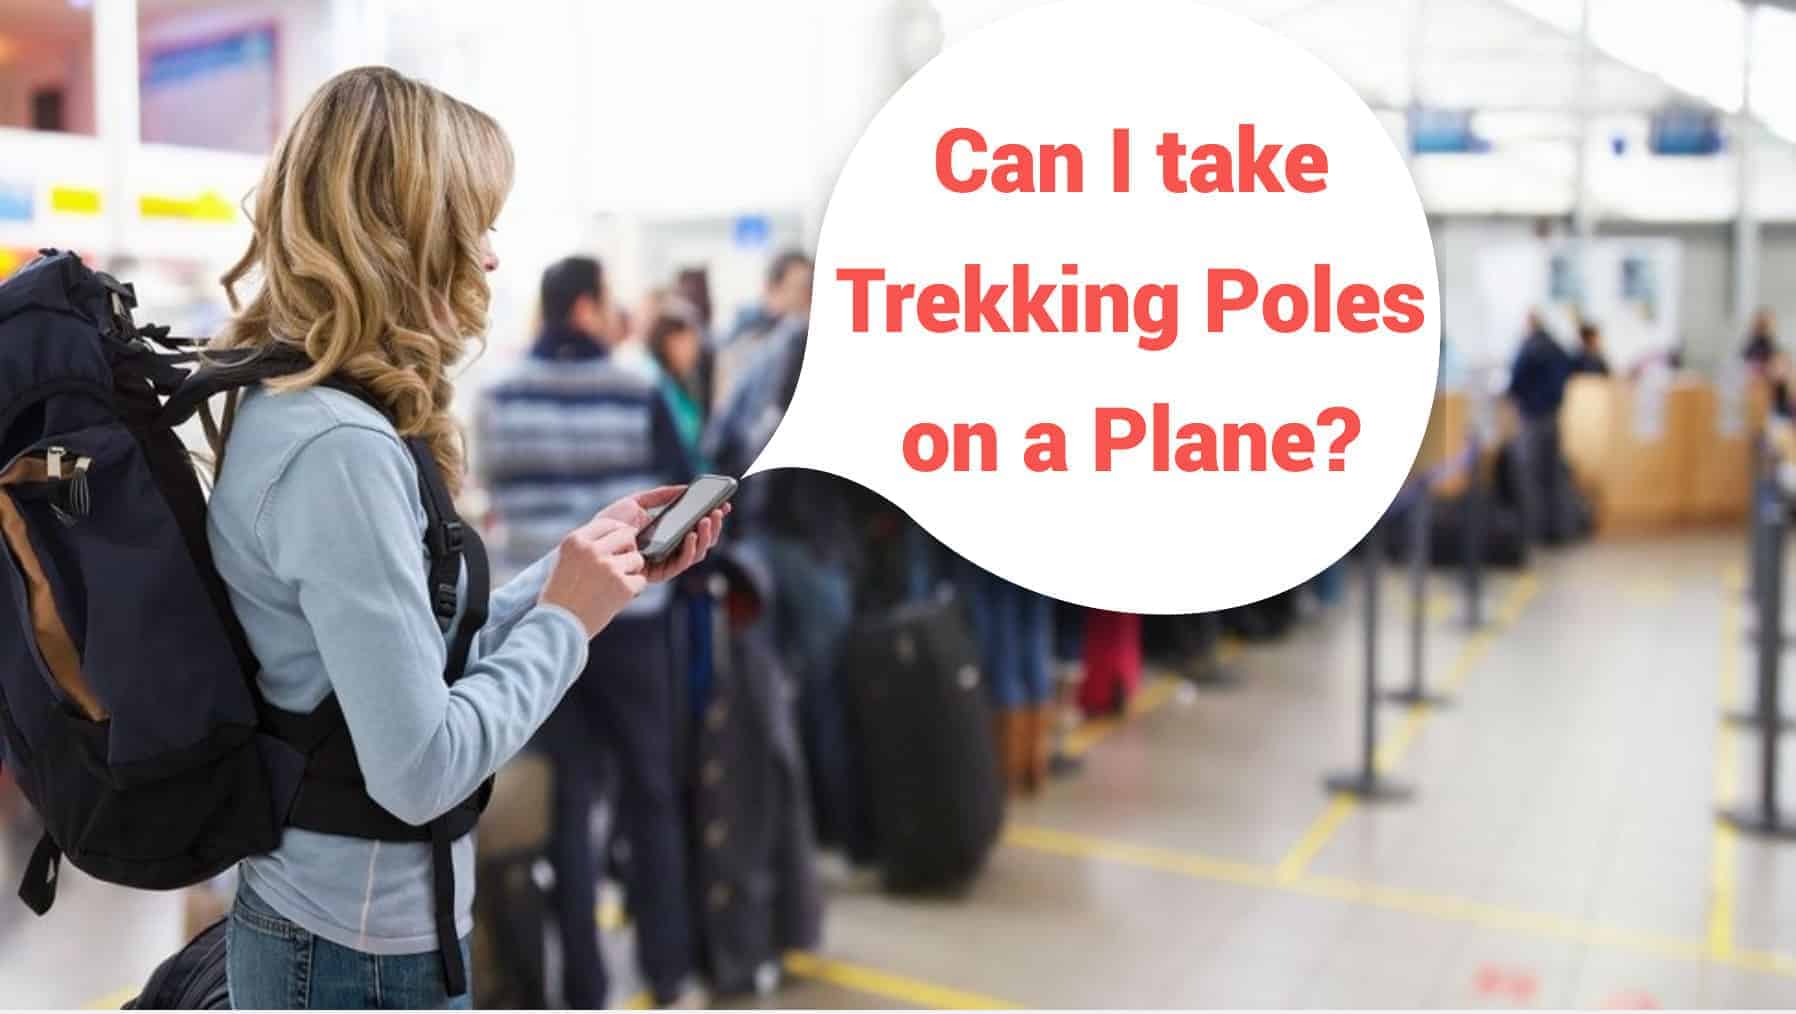 Can I take trekking or hiking poles and sticks on a plane?